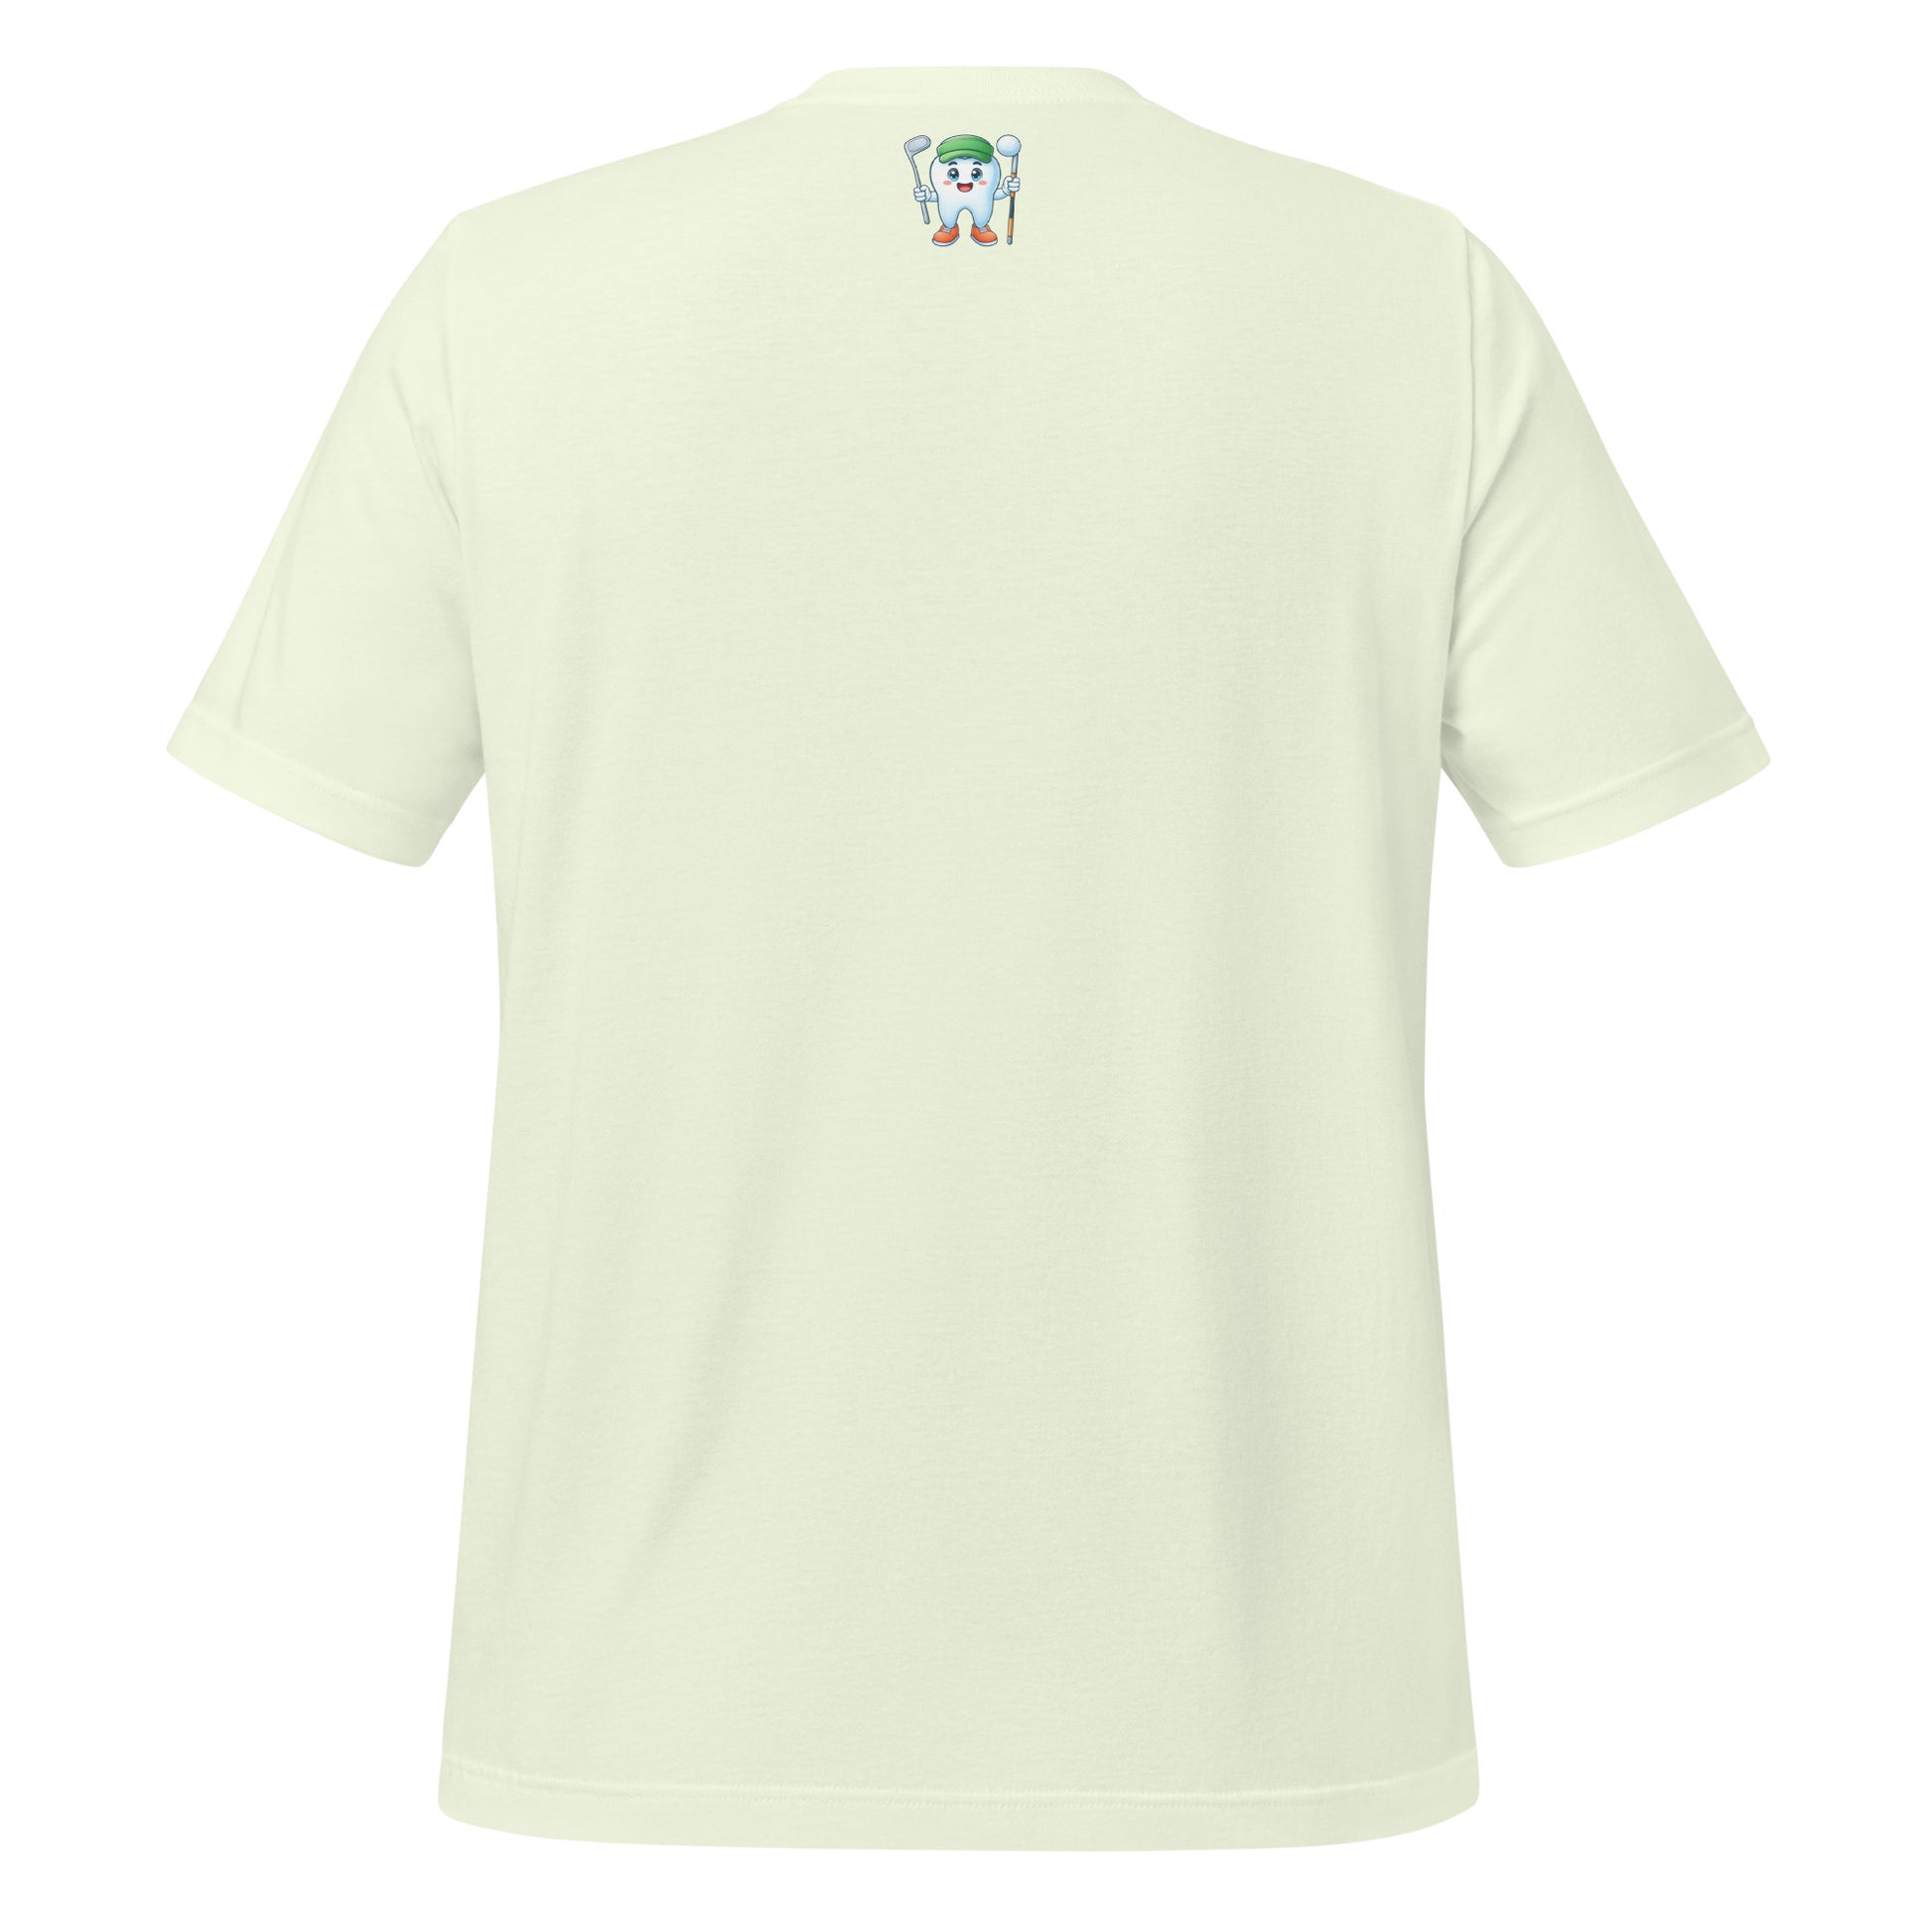 Cute dentist t-shirt showcasing an adorable tooth character in golf attire, joyfully celebrating a ‘hole in one’ achievement, perfect for dentist and dental professionals seeking unique and thematic dental apparel. Citron color, back view.